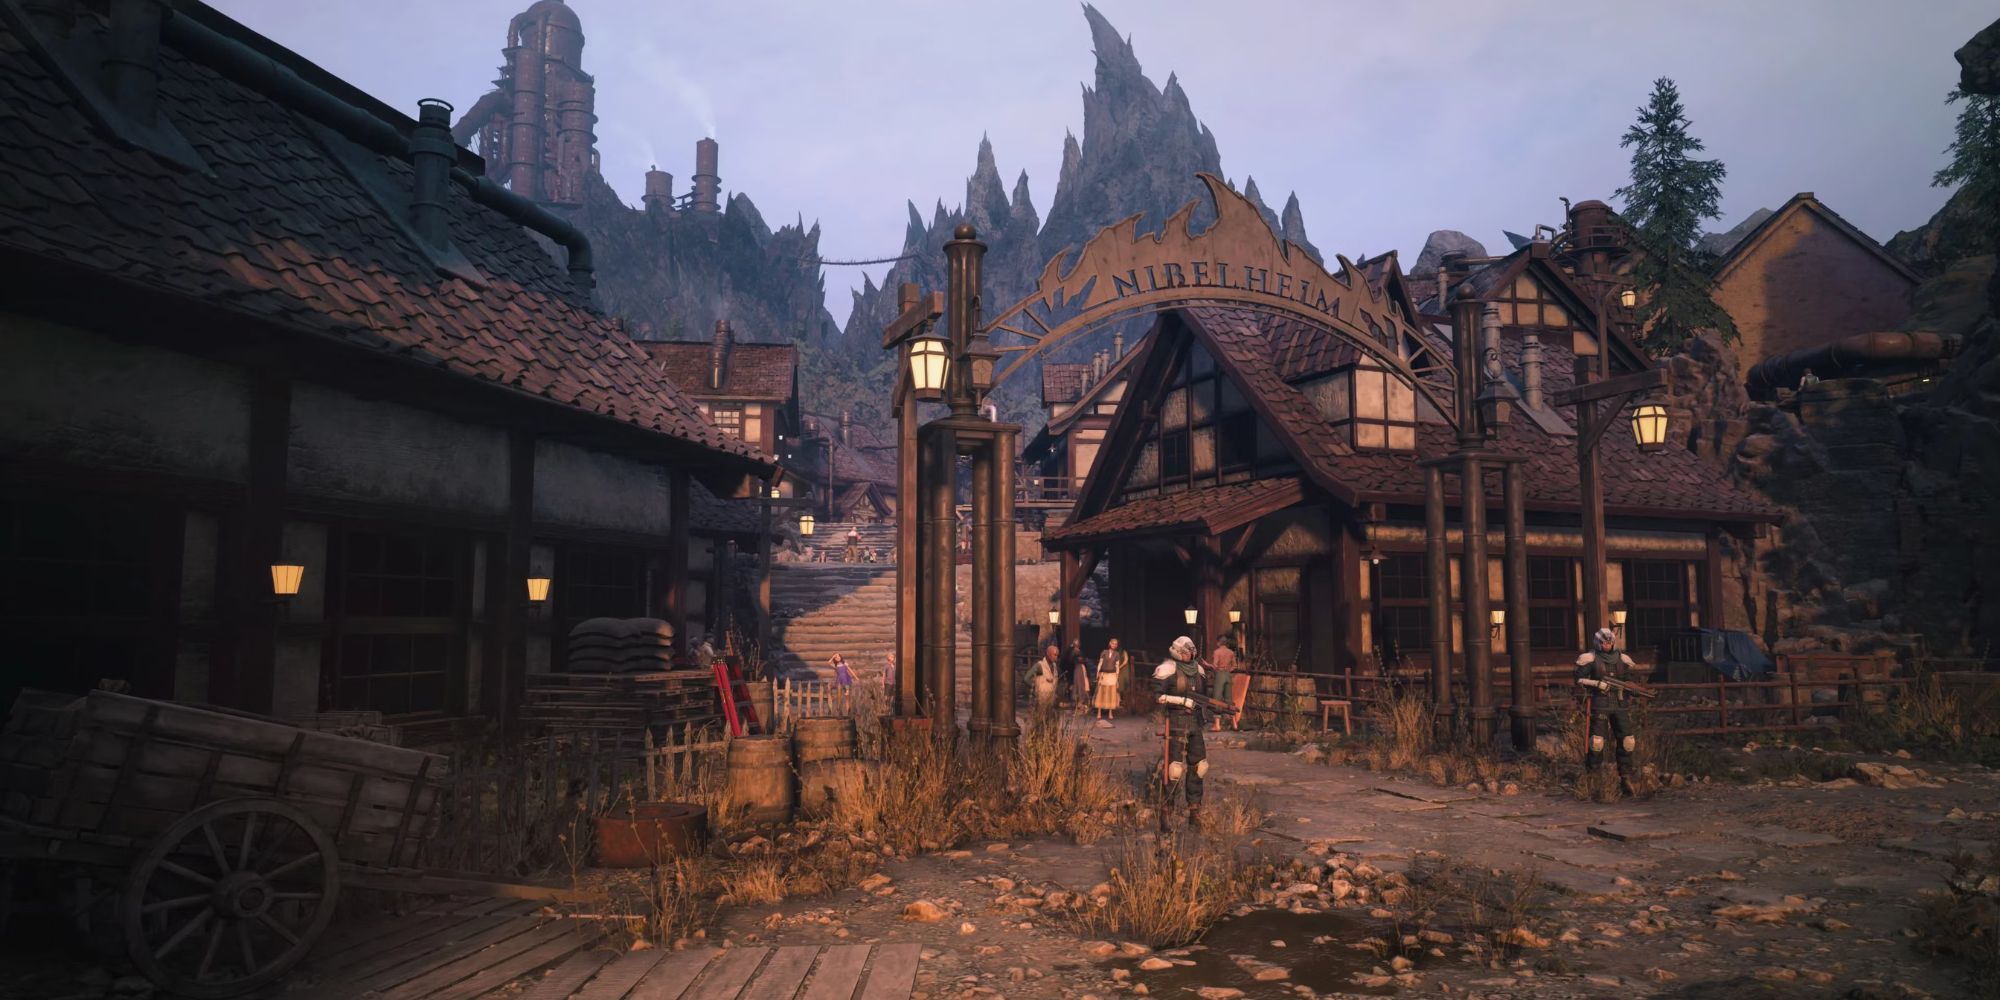 Screenshot from Final Fantasy 7 Rebirth of Nibelheim, showing a guard standing under the village sign with houses in the background.